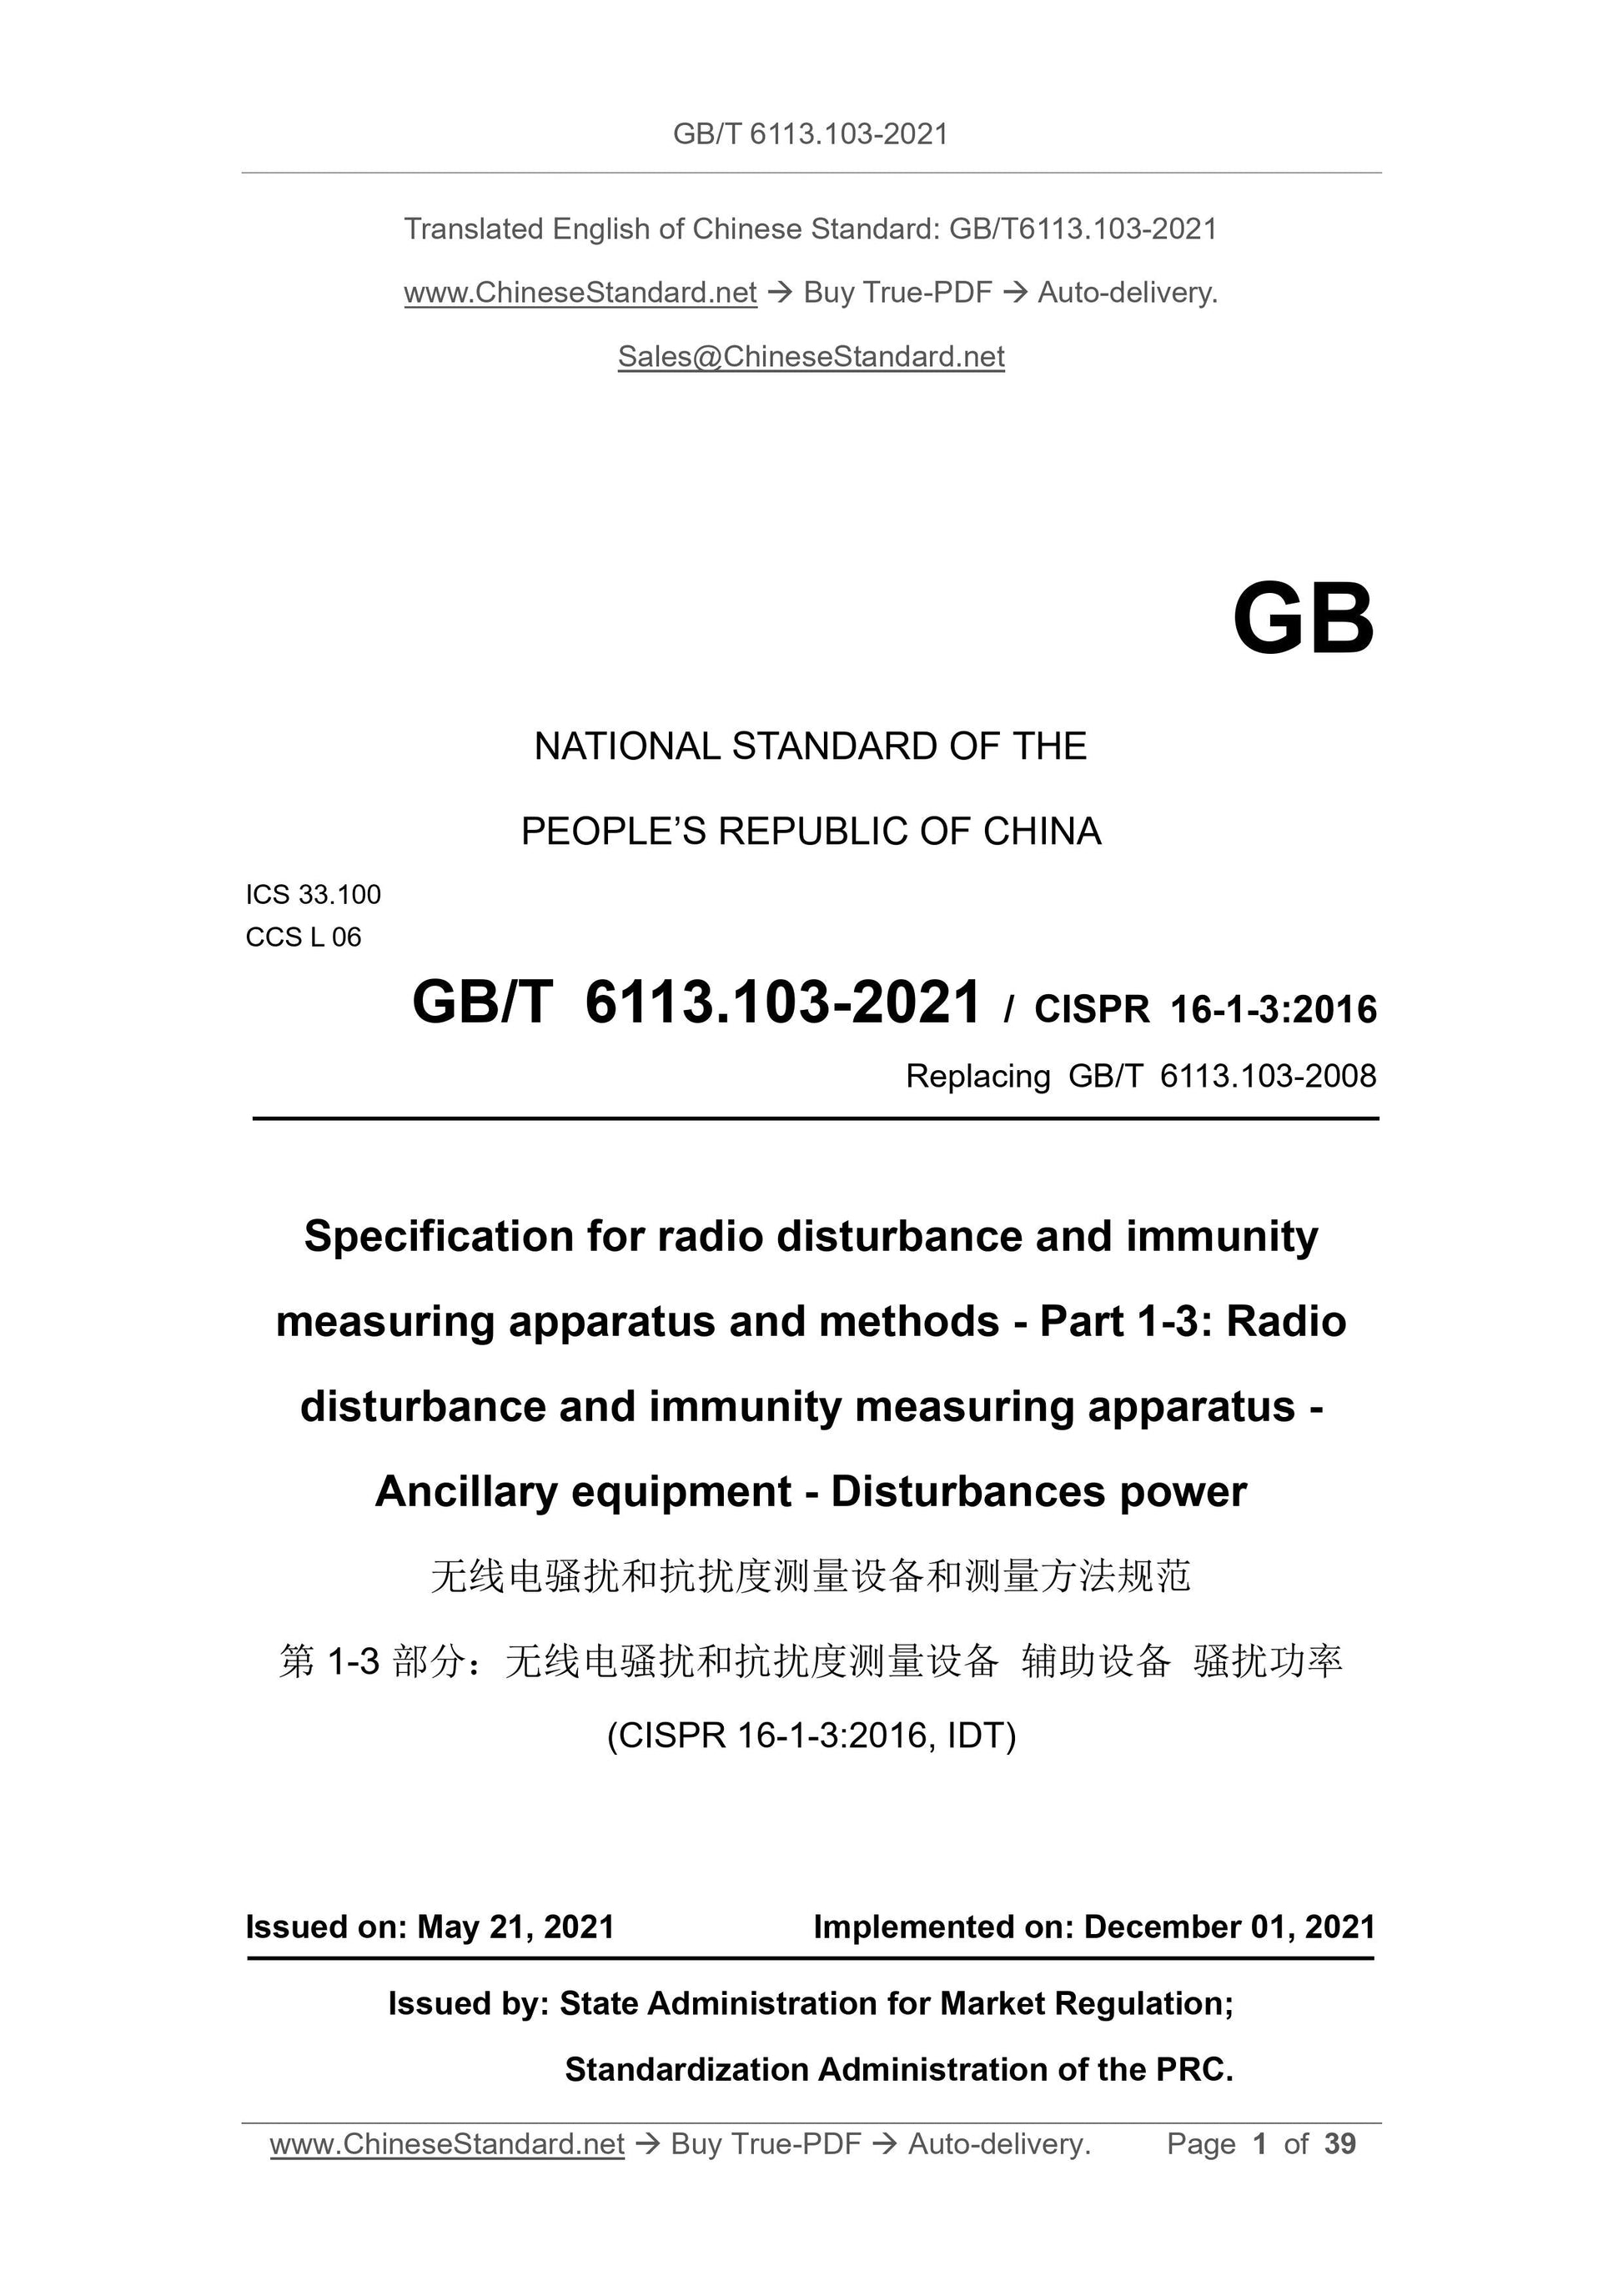 GB/T 6113.103-2021 Page 1